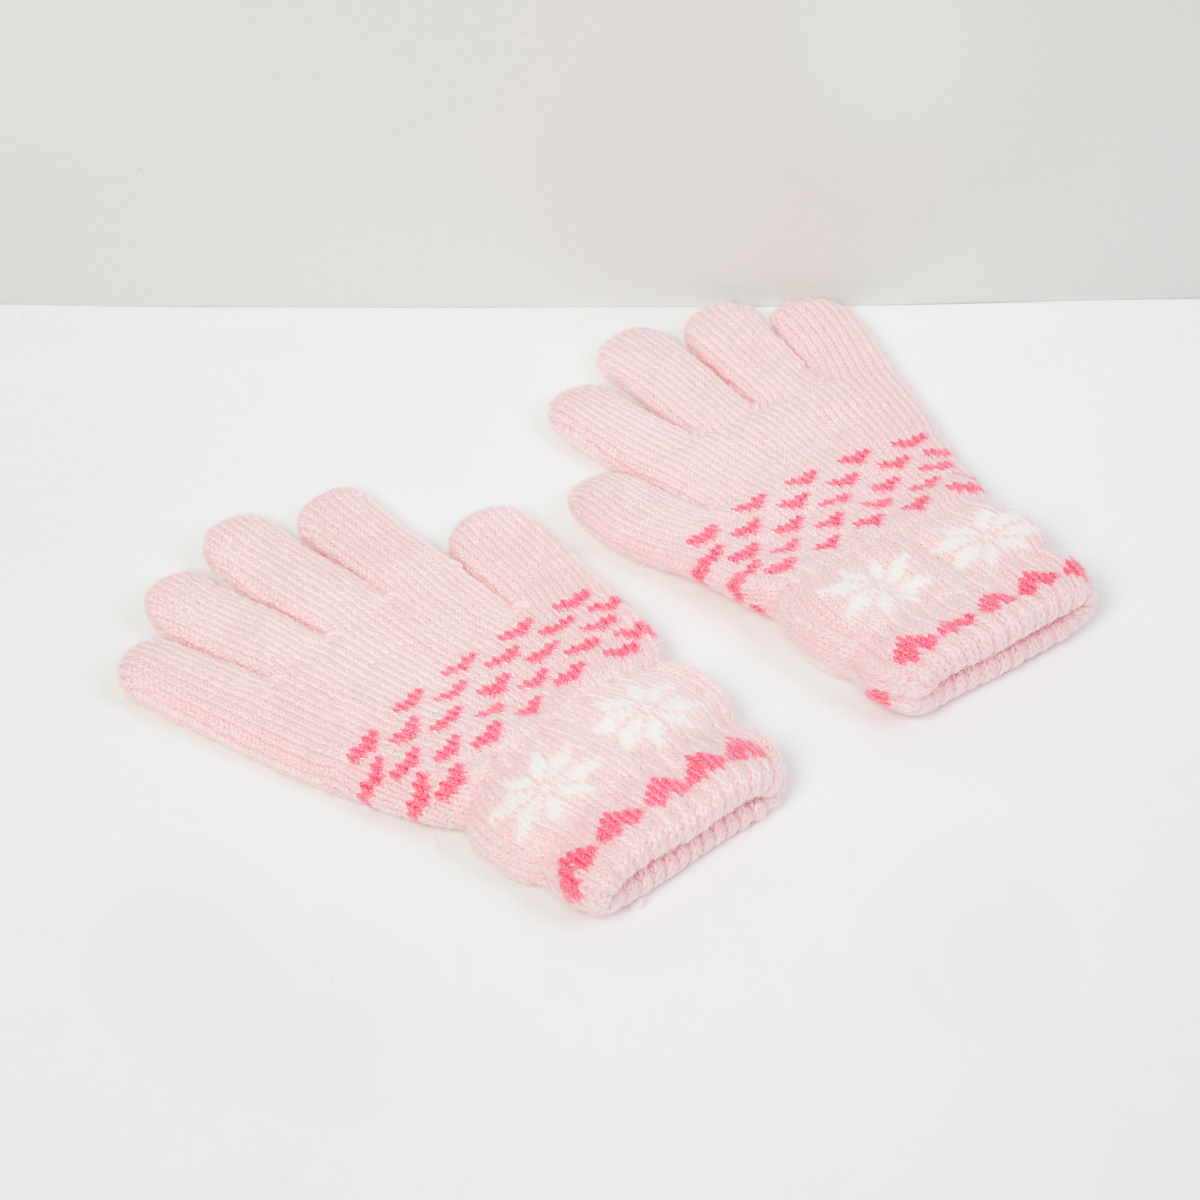 MAX Patterned Knit Gloves